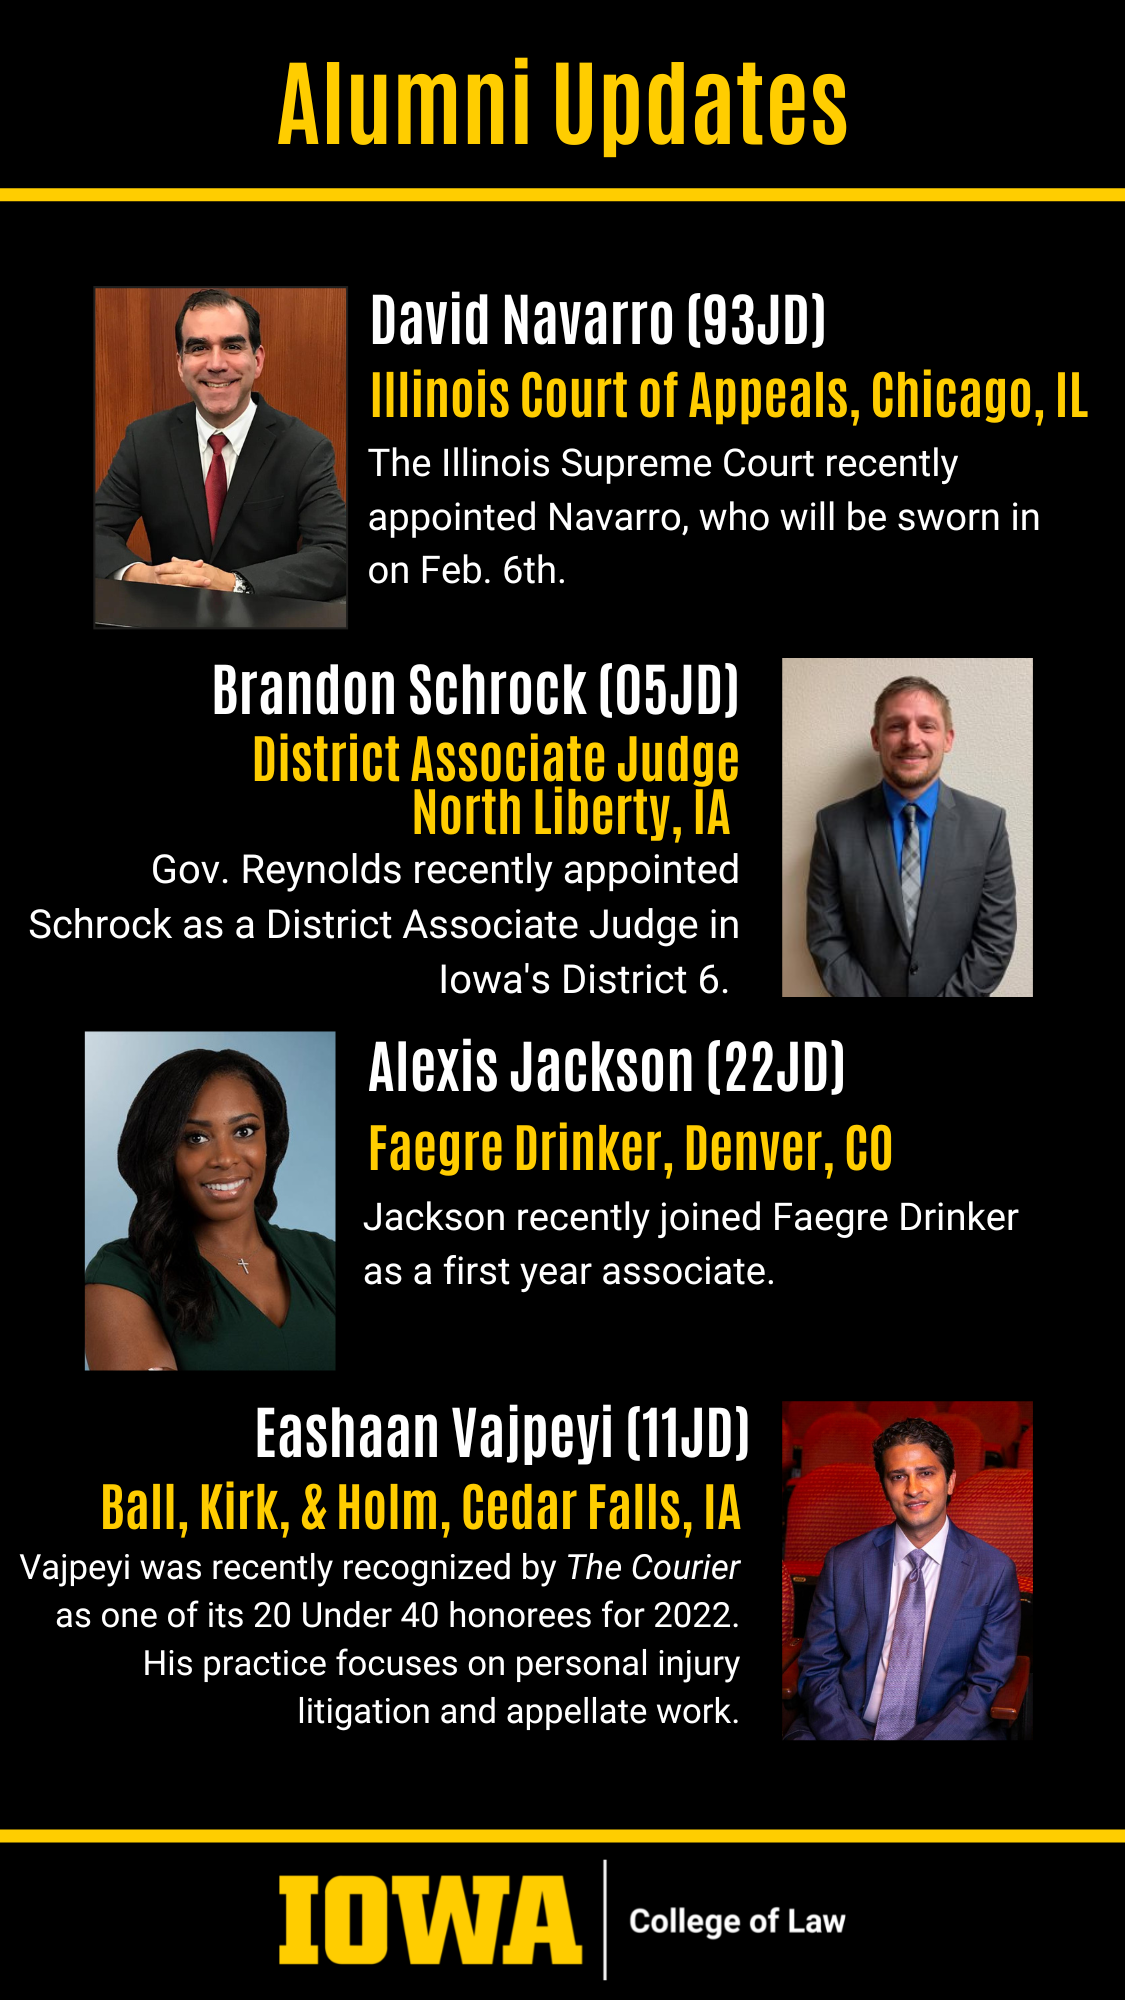 Alumni Updates: David Navarro (93JD) Illinois Court of Appeals, Chicago, IL The Illinois Supreme Court recently appointed Navarro, who will be sworn in on Feb. 6th. Brandon Schrock (05JD) District Associate Judge North Liberty, IA Gov. Reynolds recently appointed Schrock as a District Associate Judge in Iowa's District 6.Alexis Jackson (22JD) Faegre Drinker, Denver, CO Jackson recently joined Faegre Drinker as a first year associate.Eashaan Vajpeyi (11JD) Ball, Kirk, & Holm, Cedar Falls, IA Vajpeyi was recently recognized by The Courier as one of its 20 Under 40 honorees for 2022. His practice focuses on personal injury litigation and appellate work.